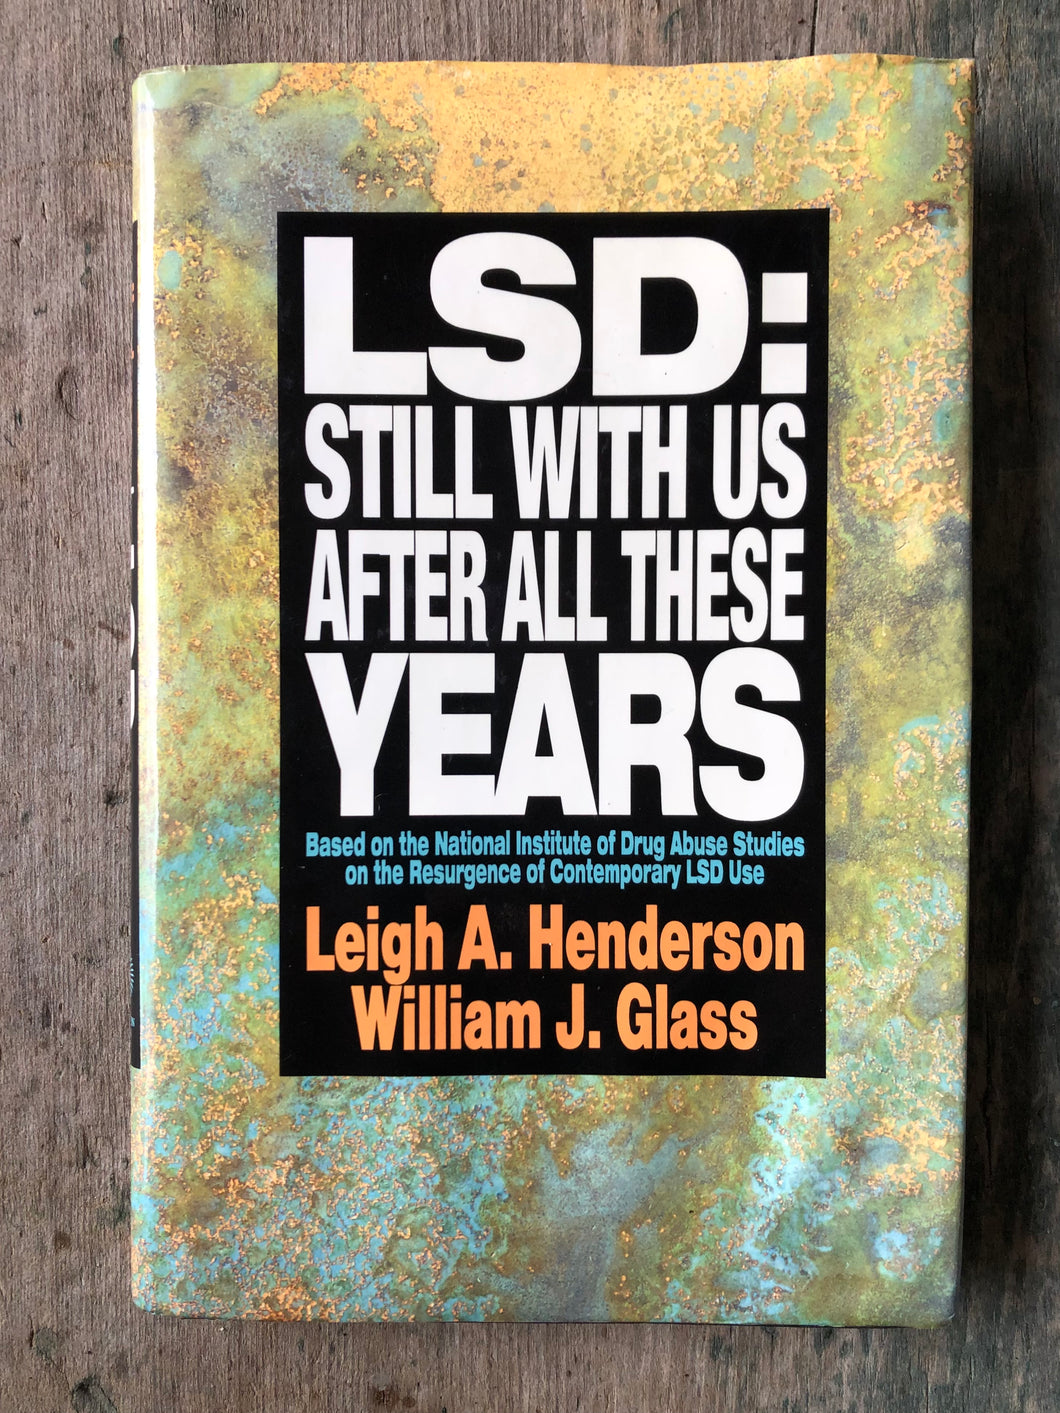 LSD: Still With Us After All These Years. edited by Leigh A. Henderson and William J. Glass